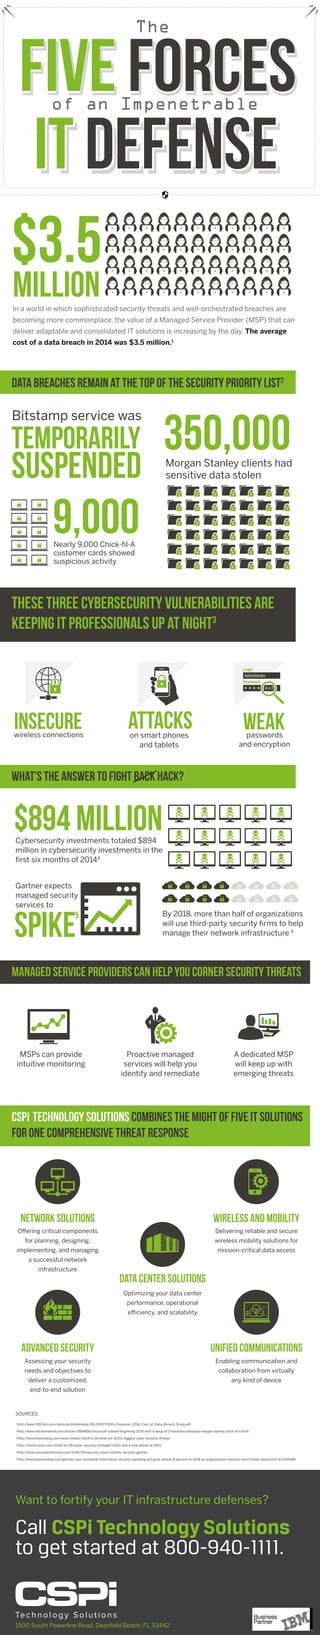 of an Impenetrable
The
FIVE FORCES
MILLION
DATA BREACHES REMAIN AT THE TOP OF THE SECURITY PRIORITY LIST2
THESE THREE CYBERSECURITY VULNERABILITIES ARE
KEEPING IT PROFESSIONALS UP AT NIGHT3
WHAT'S THE ANSWER TO FIGHT BACK HACK?
MANAGED SERVICE PROVIDERS CAN HELP YOU CORNER SECURITY THREATS
CSPi TECHNOLOGY SOLUTIONS COMBINES THE MIGHT OF FIVE IT SOLUTIONS
FOR ONE COMPREHENSIVE THREAT RESPONSE
insecure weakattacks
$894 million
SPIKE
5
network solutions wireless and mobility
advanced security
data center solutions
unified communications
In a world in which sophisticated security threats and well-orchestrated breaches are
becoming more commonplace, the value of a Managed Service Provider (MSP) that can
deliver adaptable and consolidated IT solutions is increasing by the day. The average
cost of a data breach in 2014 was $3.5 million.1
wireless connections passwords
and encryption
on smart phones
and tablets
Cybersecurity investments totaled $894
million in cybersecurity investments in the
ﬁrst six months of 20144
SOURCES:
MSPs can provide
intuitive monitoring
Oﬀering critical components
for planning, designing,
implementing, and managing
a successful network
infrastructure
Delivering reliable and secure
wireless mobility solutions for
mission-critical data access
Assessing your security
needs and objectives to
deliver a customized,
end-to-end solution
Optimizing your data center
performance, operational
eﬃciency, and scalability
Enabling communication and
collaboration from virtually
any kind of device
Proactive managed
services will help you
identify and remediate
A dedicated MSP
will keep up with
emerging threats
By 2018, more than half of organizations
will use third-party security ﬁrms to help
manage their network infrastructure 6
Gartner expects
managed security
services to
Morgan Stanley clients had
sensitive data stolen
1
http://www-935.ibm.com/services/multimedia/SEL03027USEN_Poneman_2014_Cost_of_Data_Breach_Study.pdf
2
http://www.networkworld.com/article/2864856/microsoft-subnet/beginning-2015-with-a-bang-of-3-breaches-bitstamp-morgan-stanley-chick-ﬁl-a.html
3
http://www.bloomberg.com/news/videos/2014-11-14/what-are-2015s-biggest-cyber-security-threats
4
http://techcrunch.com/2014/12/28/cyber-security-hindsight-2020-and-a-look-ahead-at-2015
5
http://news.verizonenterprise.com/2014/09/security-cloud-mobility-services-gartner
6
http://www.darkreading.com/gartner-says-worldwide-information-security-spending-will-grow-almost-8-percent-in-2014-as-organizations-become-more-threat-aware/d/d-id/1306586
IT DefenseIT DefenseIT Defense
$3.5
Want to fortify your IT infrastructure defenses?
1500 South Powerline Road, Deerﬁeld Beach, FL 33442
Call CSPi TechnologySolutions
to get started at 800-940-1111.
 